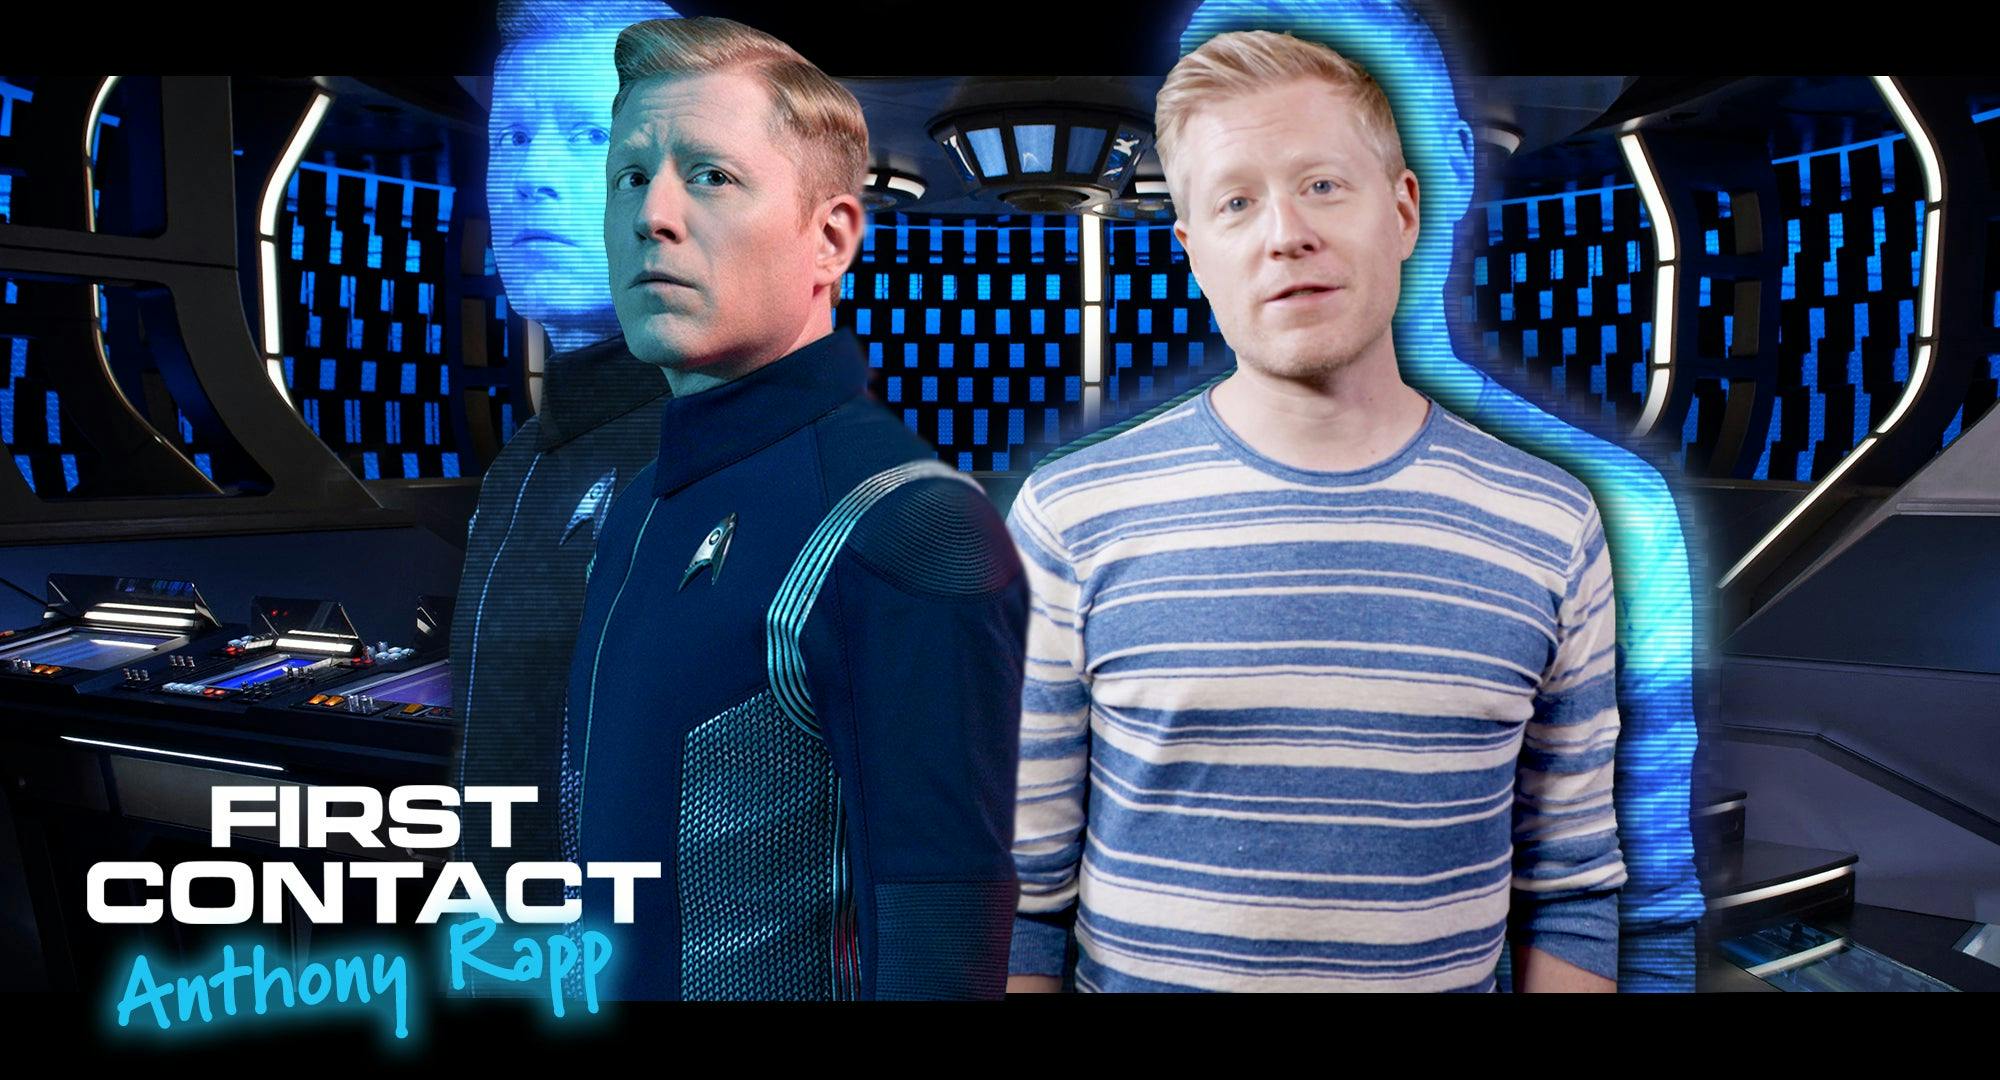 Anthony Rapp's First Contact